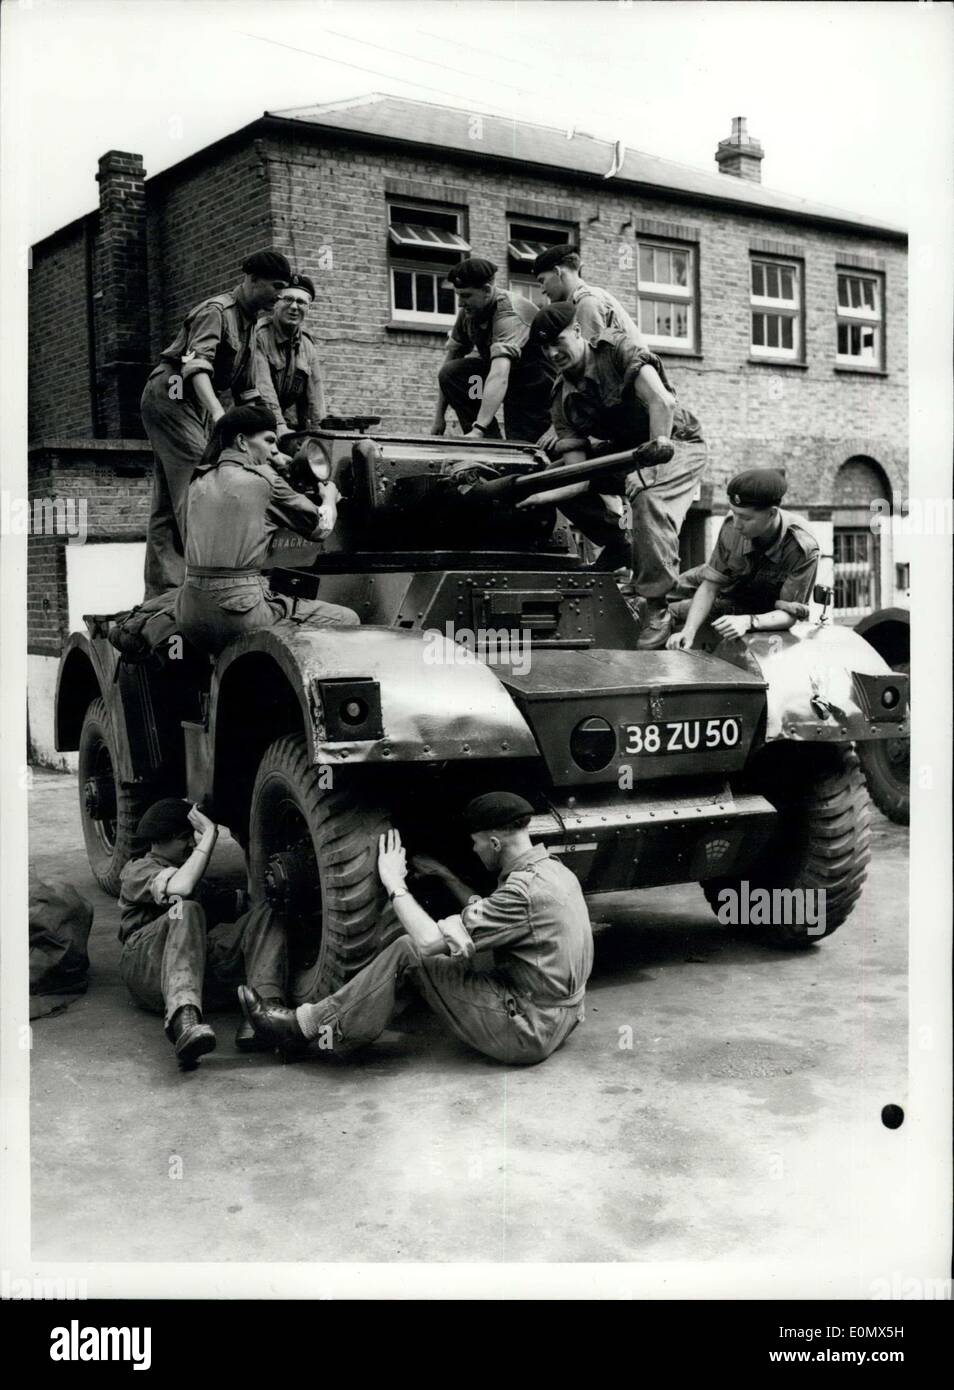 Aug. 03, 1956 - Operation Suez begins - life guards get orders to pack overseas: Among the Army units involved in the Suez Canal emergency are the Life Guards at Windsor, who have been ordered to pack for overseas duty. Many of them have been recalled form leave. Photo shows the scene as men of the Life Guards prepare an armoured vehicle at Windsor Barracks this morning (Combernere Barracks, Windsor) Stock Photo